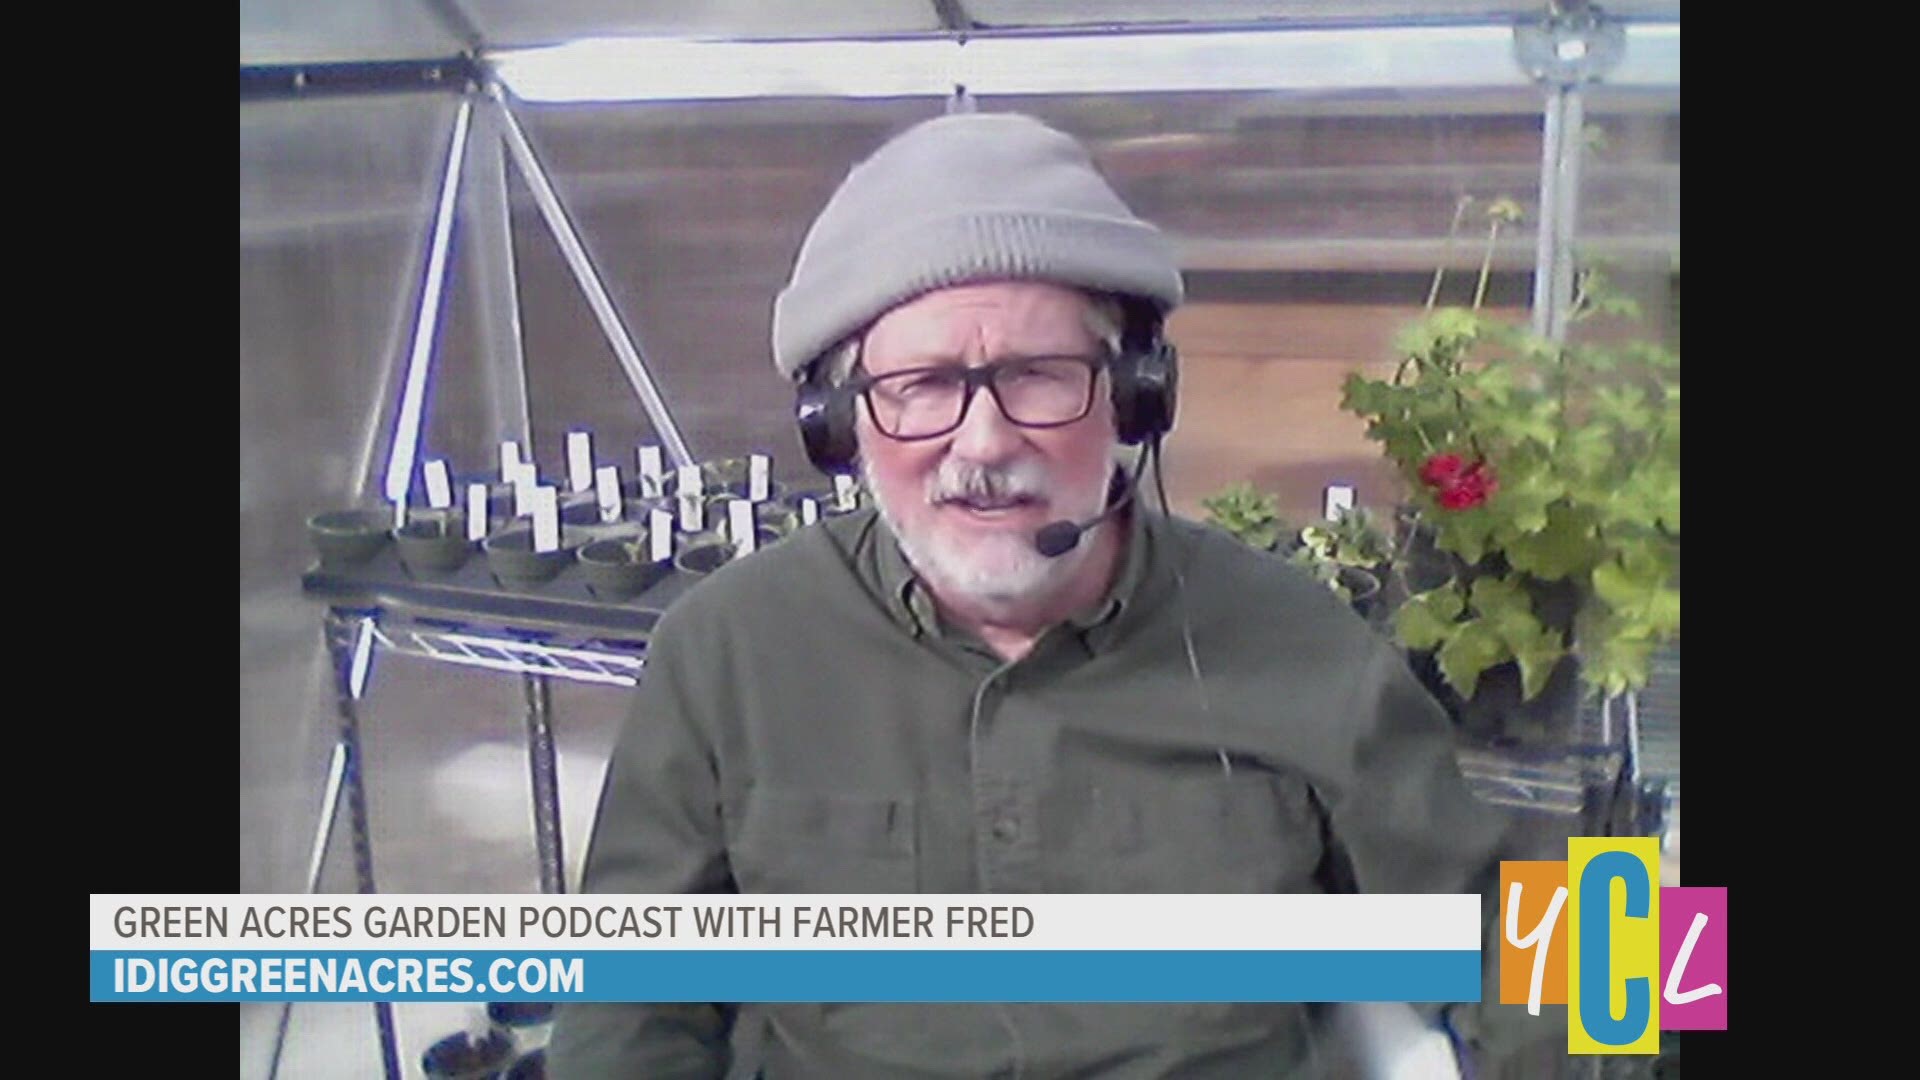 Master Gardener Farmer Fred talk about a new podcast for budding gardeners or seasoned horticulturists in NorCal. This segment was paid for by Green Acres.